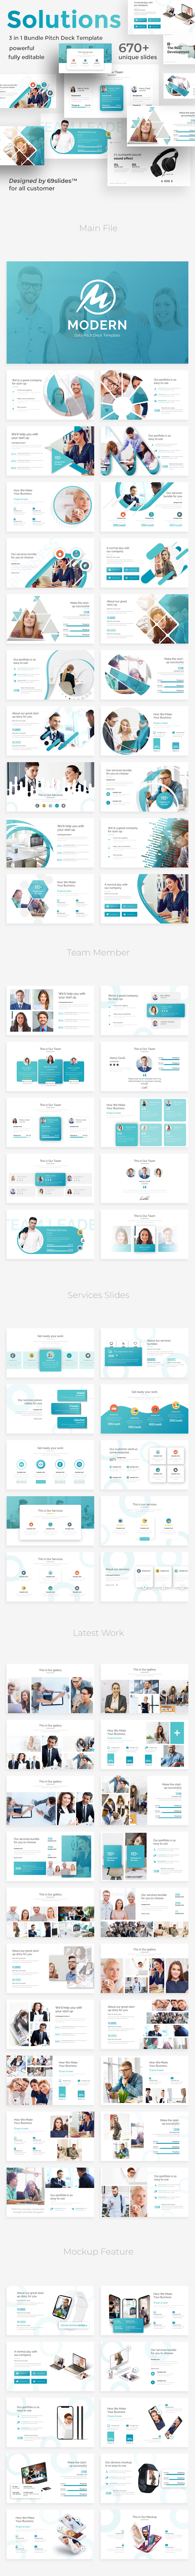 Solution Focused 3 in 1 Pitch Deck Bundle Powerpoint Template Template